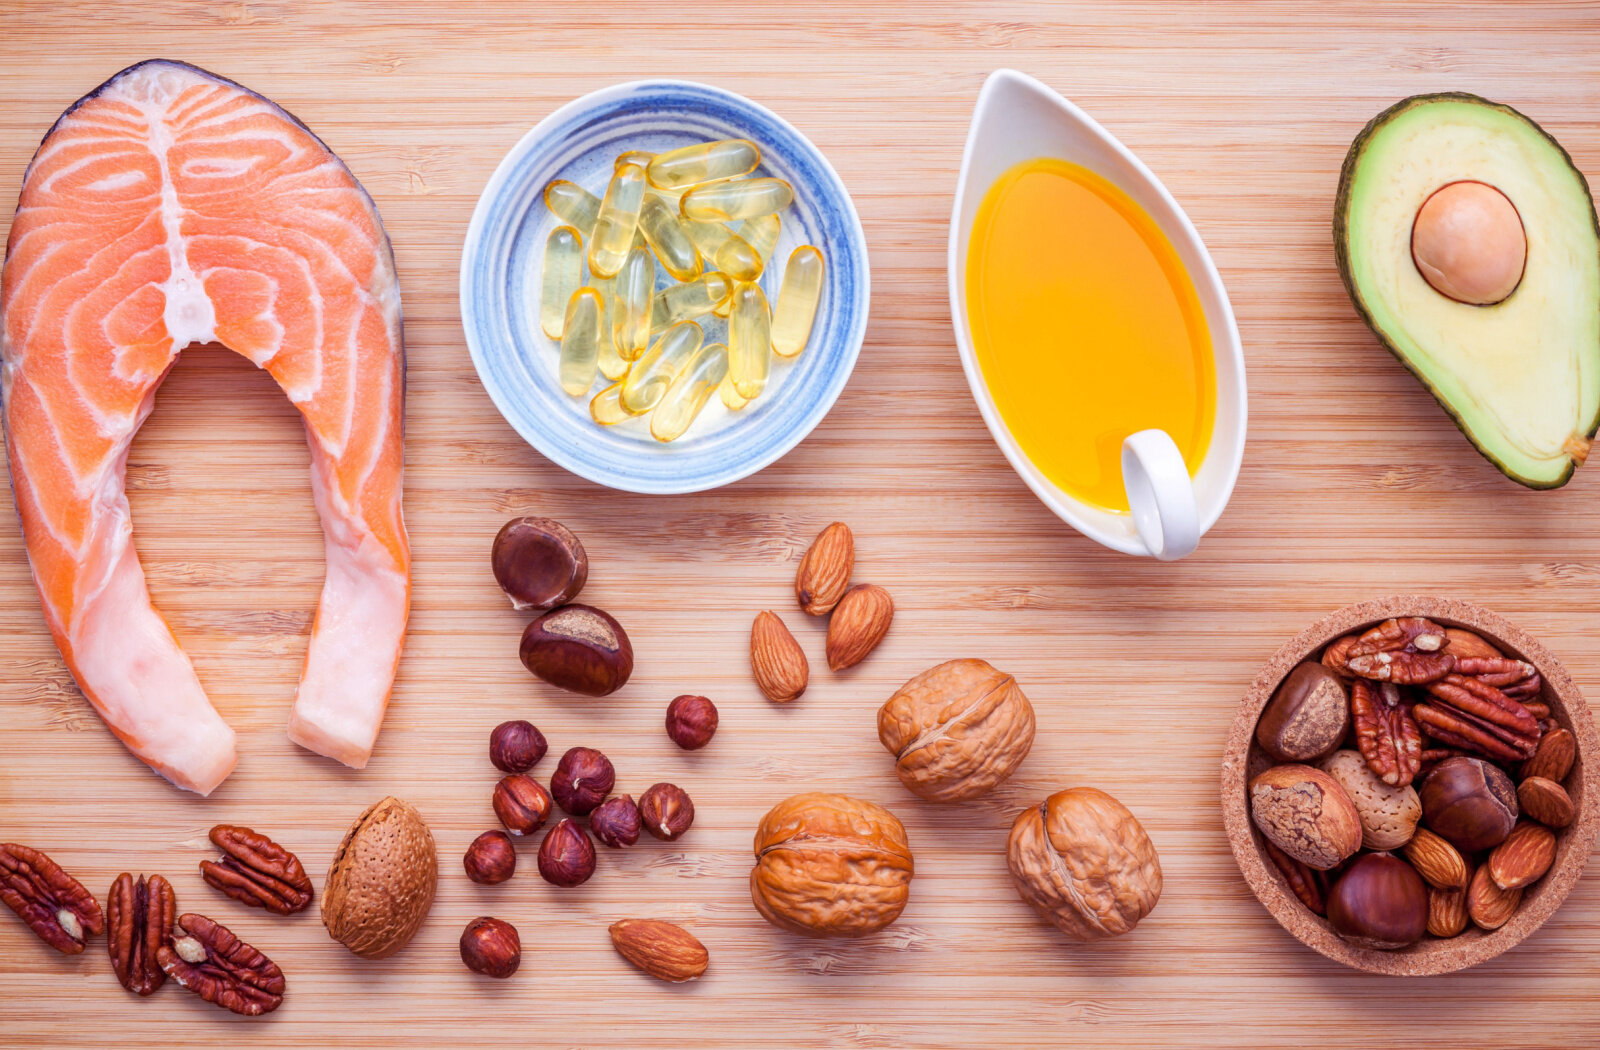 Selection food sources of omega 3 and unsaturated fats. Superfood high vitamin E for  maintaining healthy memory. Almond ,pecan , hazelnuts, walnuts ,olive oil ,fish oil ,avocado and salmon on bamboo cutting board.
